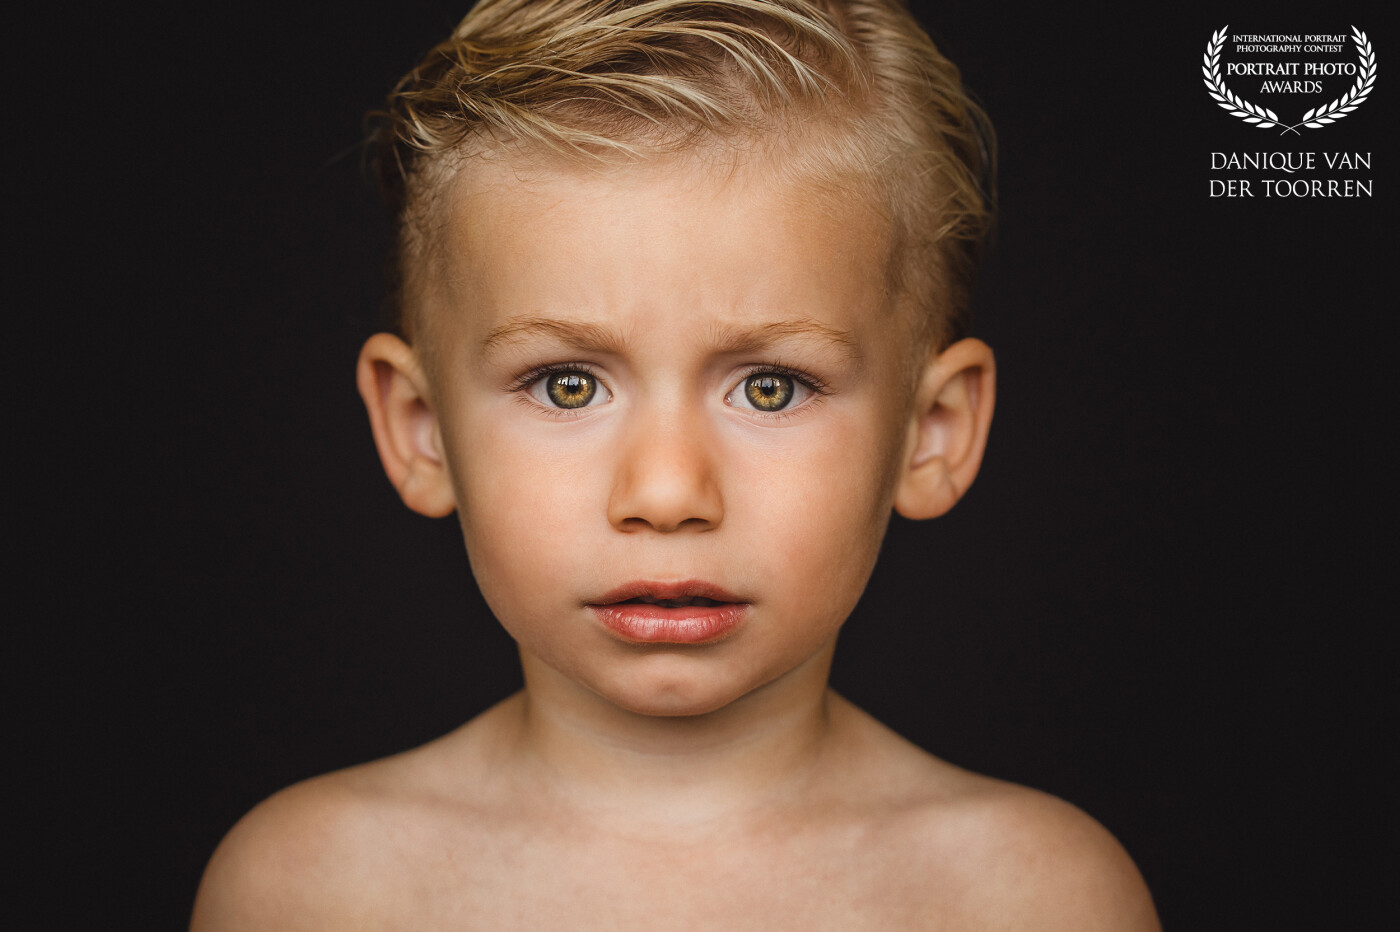 A beautiful photo of this 3 year old boy with bare shoulders.<br />
<br />
Model: Lux<br />
Photo & Lightroom edit: @daniquevdtphotography